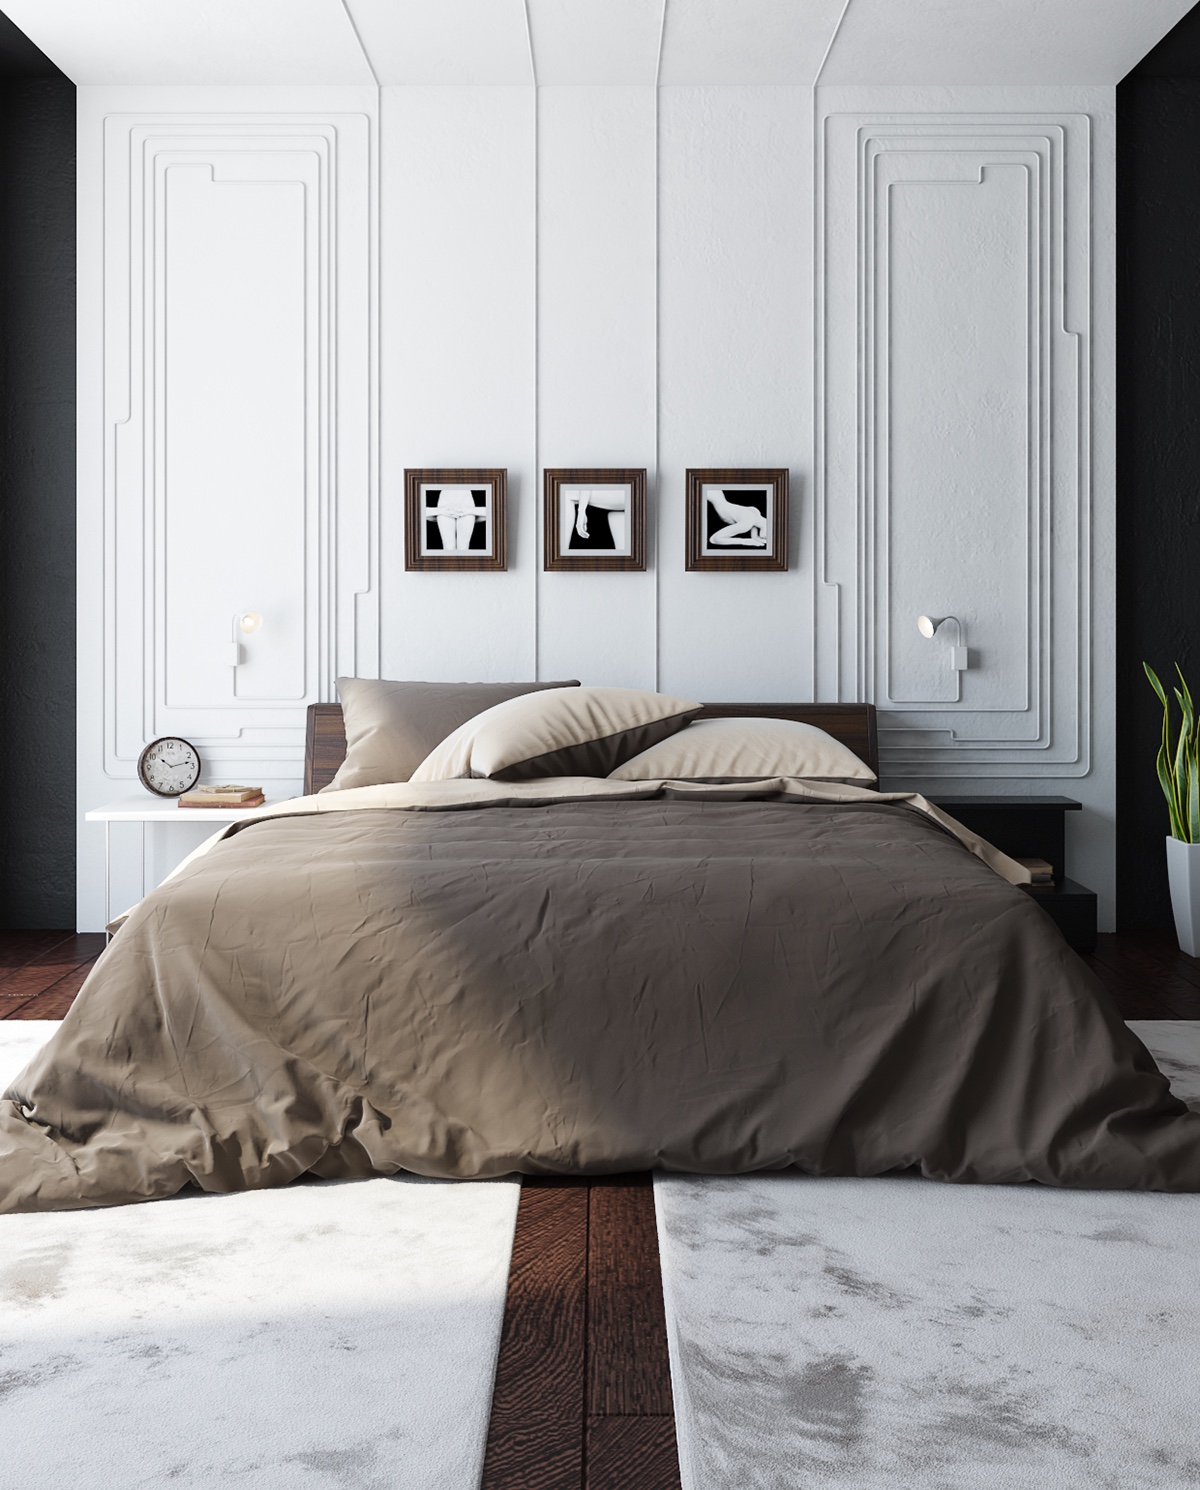 Cheeky elements can be hidden in less-bold colouring. Semi-Georgian white panelling holds a triptych series sexual in nature, while similarly-hued bedding introduces the serious.